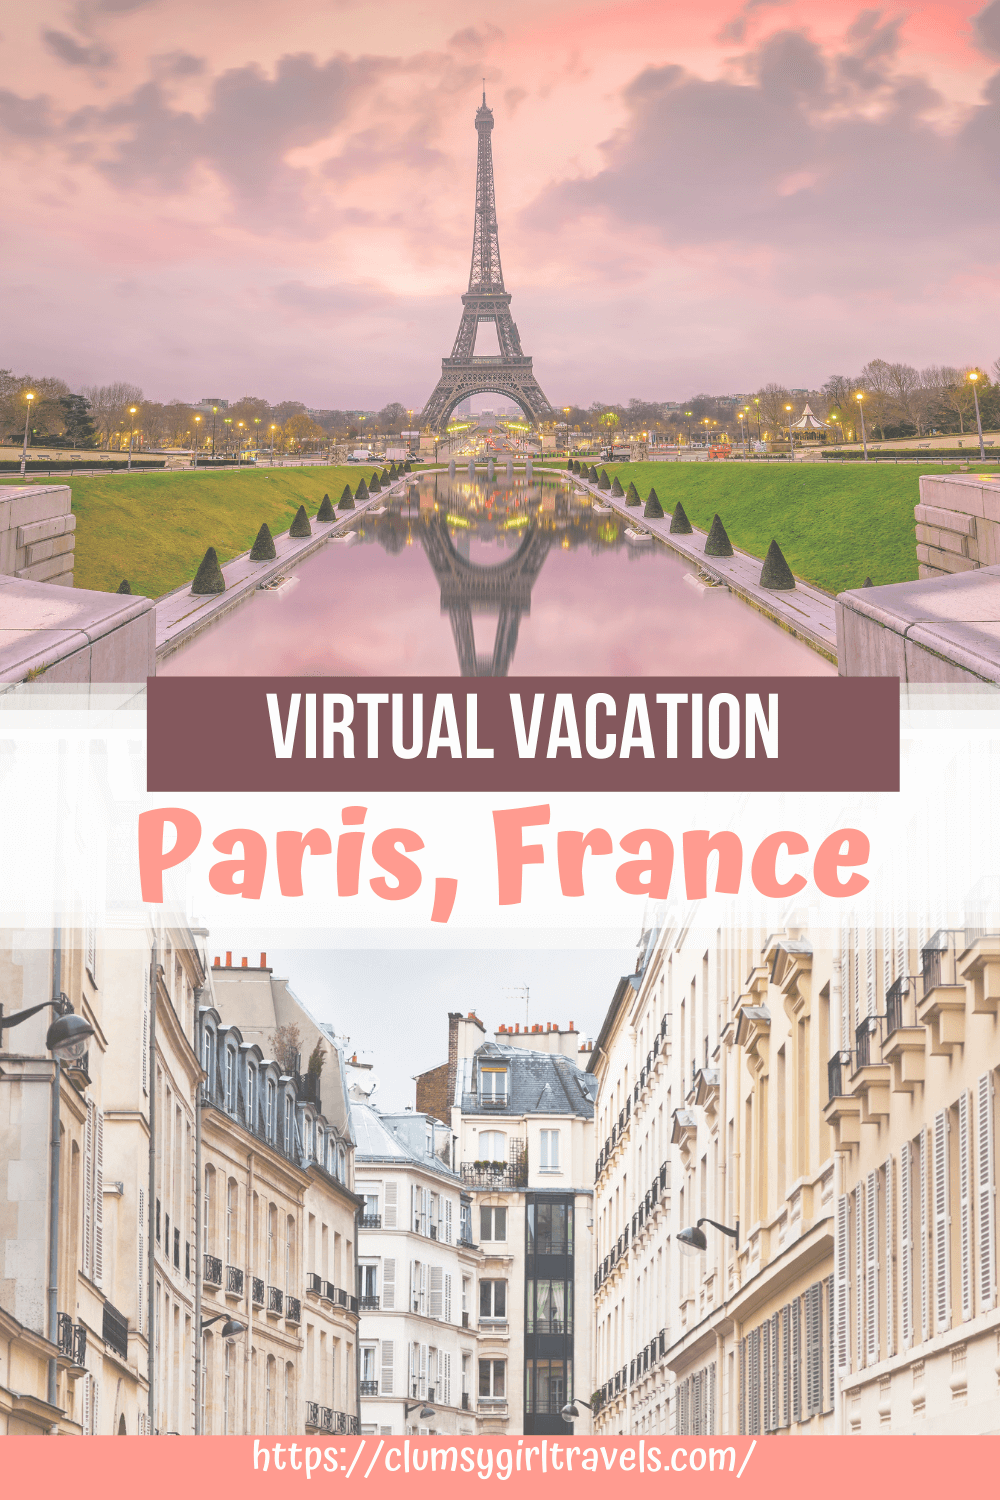 This virtual tour of Paris will take you around the city of lights through food, culture and so much more! You won't want to miss this virtual Paris tour.